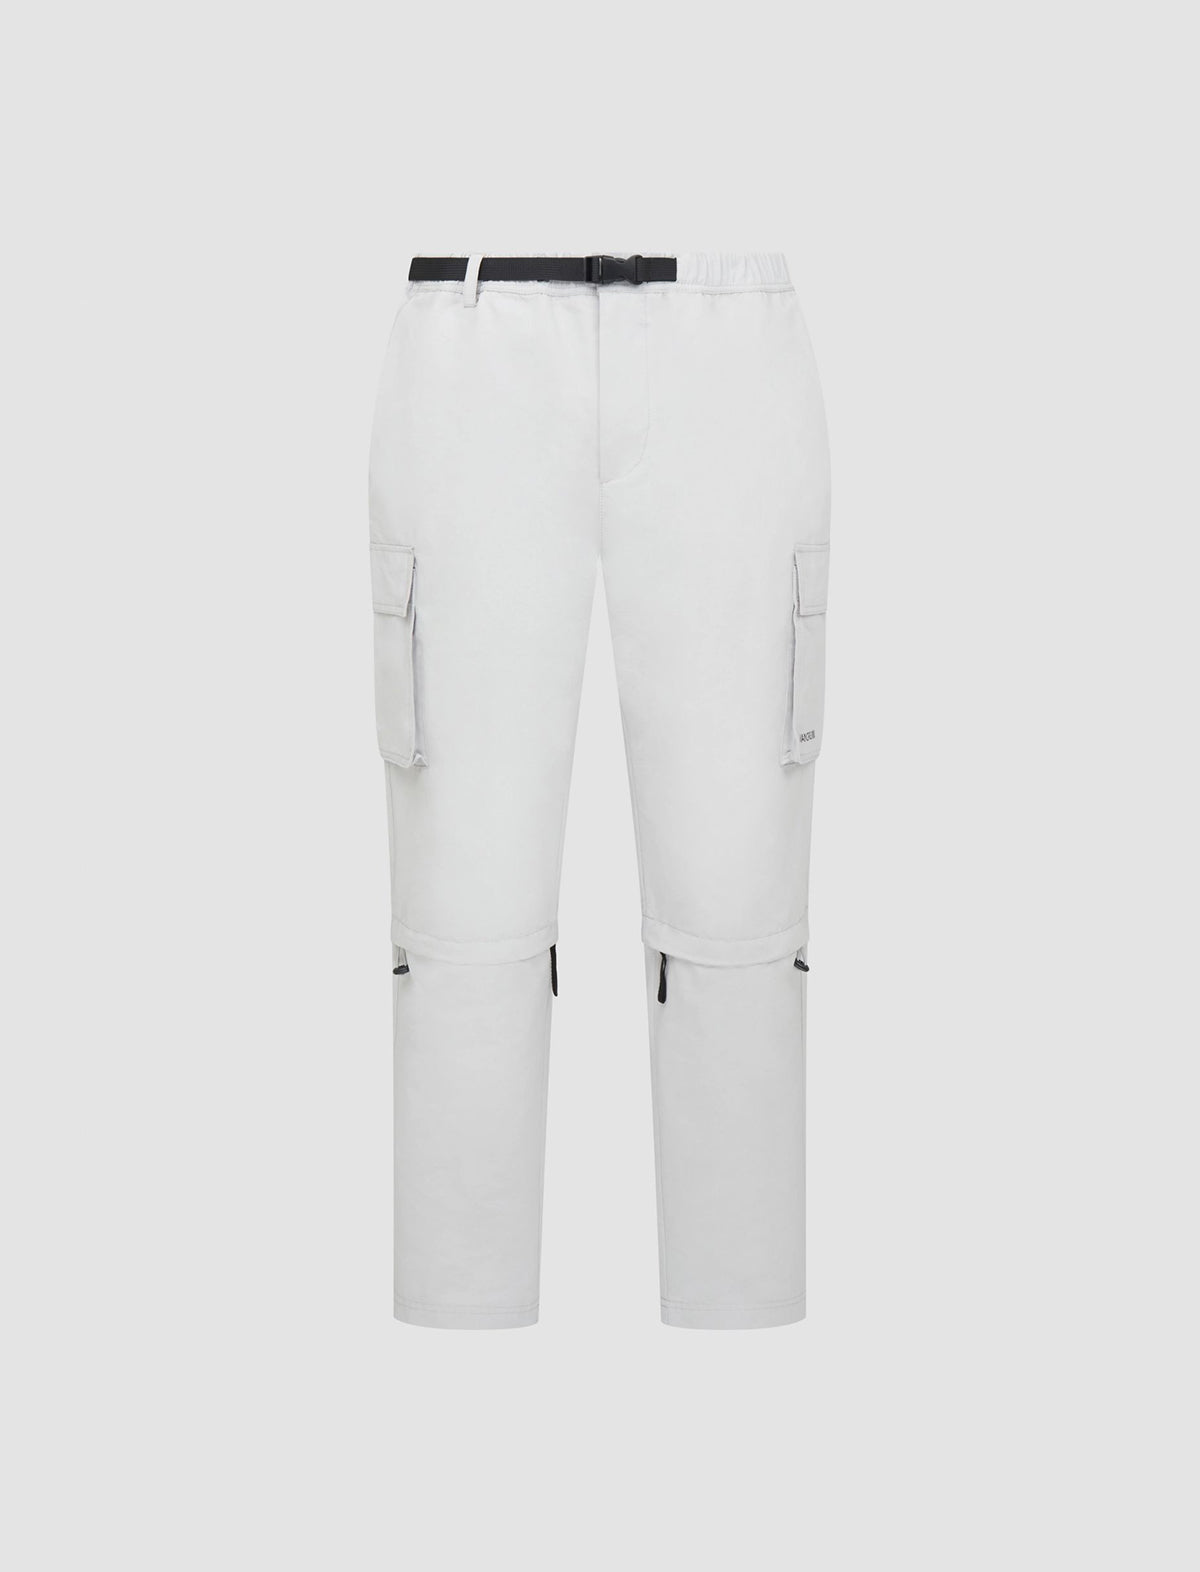 MANORS GOLF Zip Off Tech-Plus Four Pants in Grey